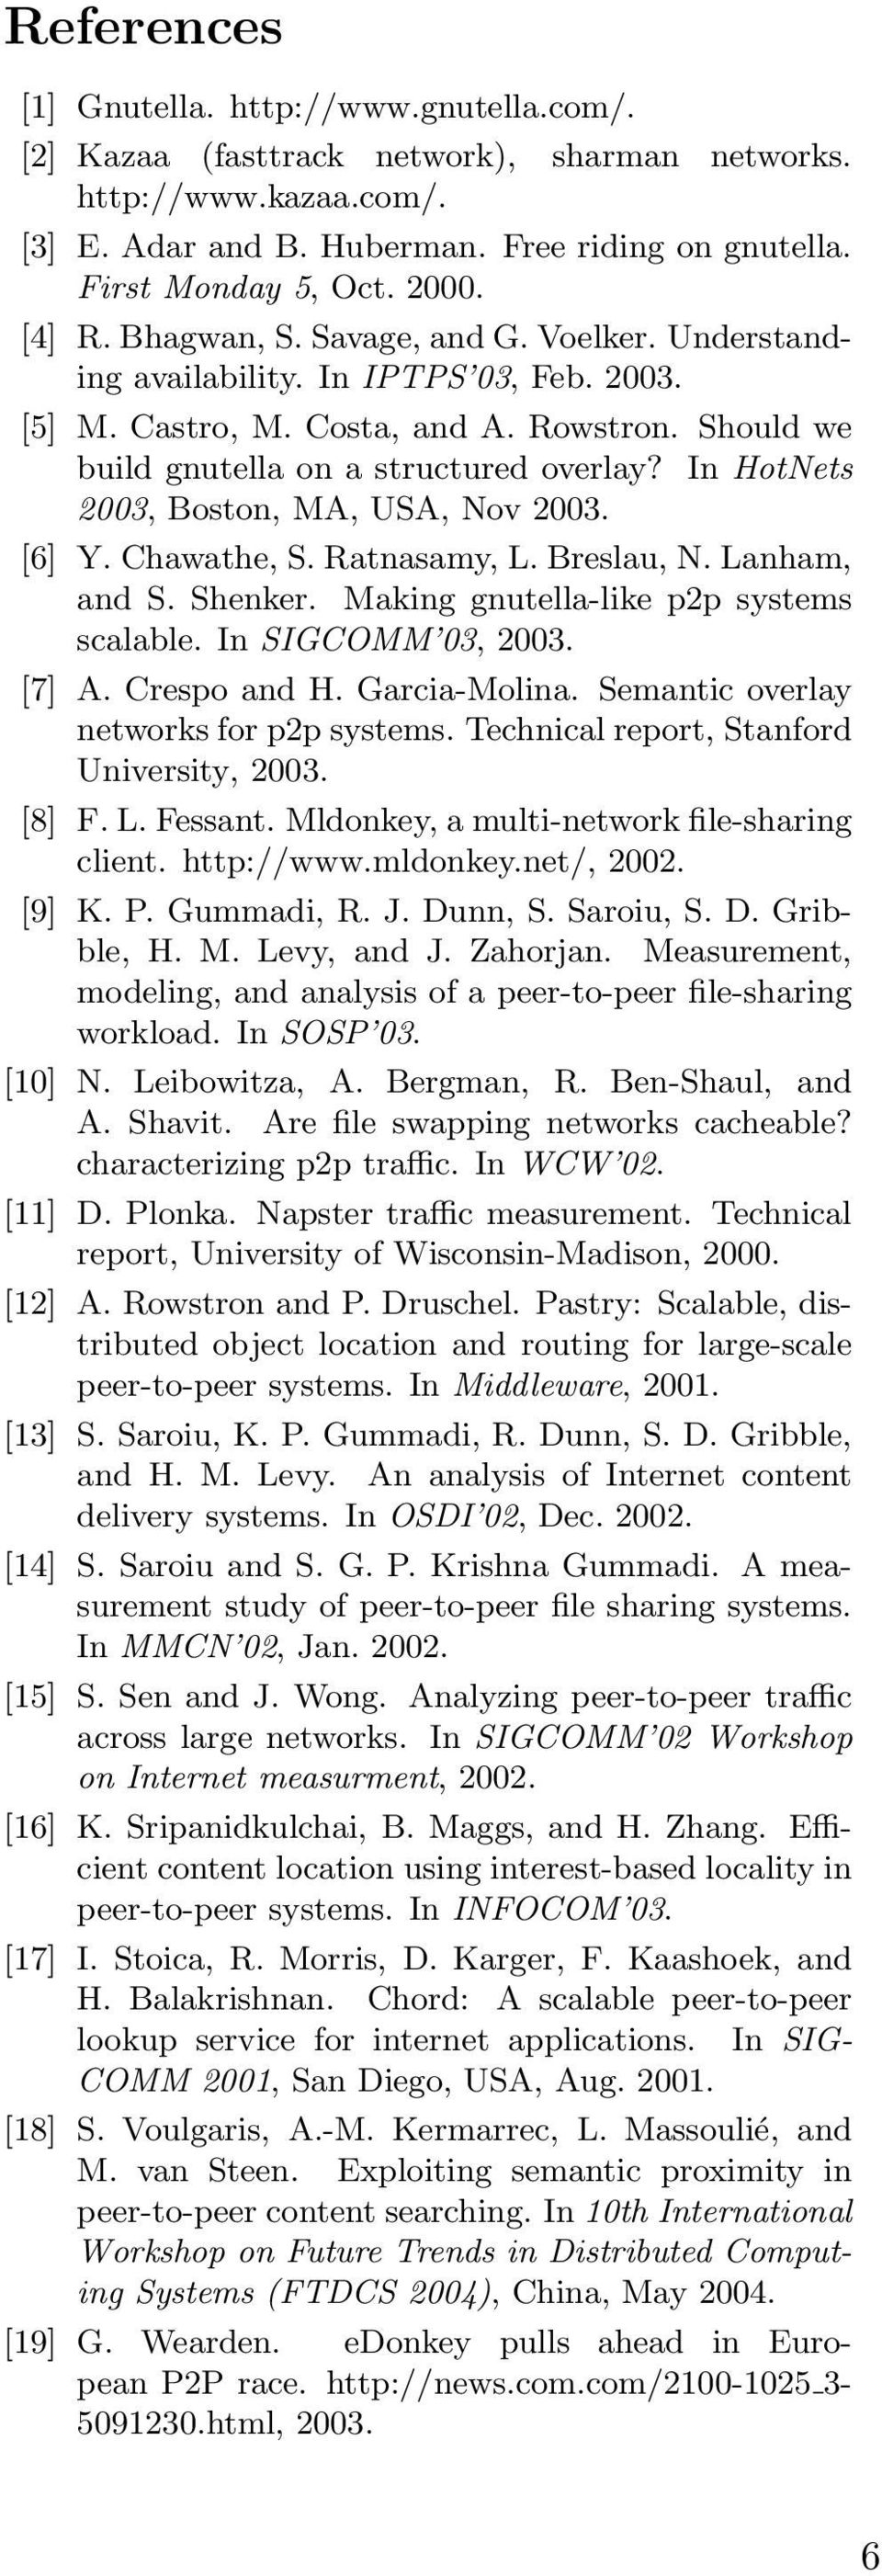 In HotNets 23, Boston, MA, USA, Nov 23. [6] Y. Chawathe, S. Ratnasamy, L. Breslau, N. Lanham, and S. Shenker. Making gnutella-like p2p systems scalable. In SIGCOMM 3, 23. [7] A. Crespo and H.